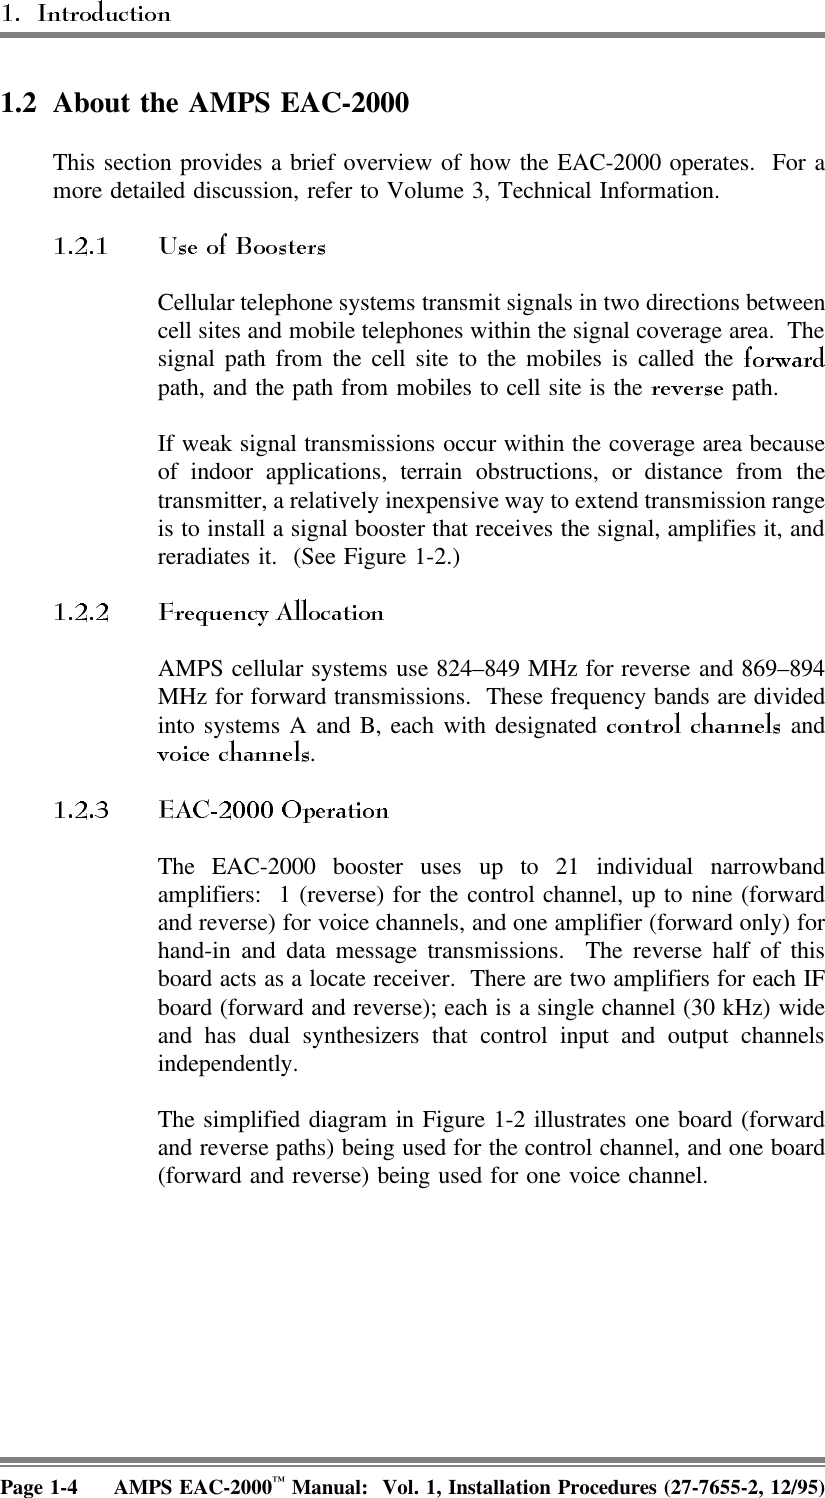 1.2 About the AMPS EAC-2000This section provides a brief overview of how the EAC-2000 operates.  For amore detailed discussion, refer to Volume 3, Technical Information. Cellular telephone systems transmit signals in two directions betweencell sites and mobile telephones within the signal coverage area.  Thesignal path from the cell site to the mobiles is called the path, and the path from mobiles to cell site is the   path. If weak signal transmissions occur within the coverage area becauseof indoor applications, terrain obstructions, or distance from thetransmitter, a relatively inexpensive way to extend transmission rangeis to install a signal booster that receives the signal, amplifies it, andreradiates it.  (See Figure 1-2.)AMPS cellular systems use 824–849 MHz for reverse and 869–894MHz for forward transmissions.  These frequency bands are dividedinto systems A and B, each with designated   and. The EAC-2000 booster uses up to 21 individual narrowbandamplifiers:  1 (reverse) for the control channel, up to nine (forwardand reverse) for voice channels, and one amplifier (forward only) forhand-in and data message transmissions.  The reverse half of thisboard acts as a locate receiver.  There are two amplifiers for each IFboard (forward and reverse); each is a single channel (30 kHz) wideand has dual synthesizers that control input and output channelsindependently. The simplified diagram in Figure 1-2 illustrates one board (forwardand reverse paths) being used for the control channel, and one board(forward and reverse) being used for one voice channel.Page 1-4 AMPS EAC-2000™ Manual:  Vol. 1, Installation Procedures (27-7655-2, 12/95)